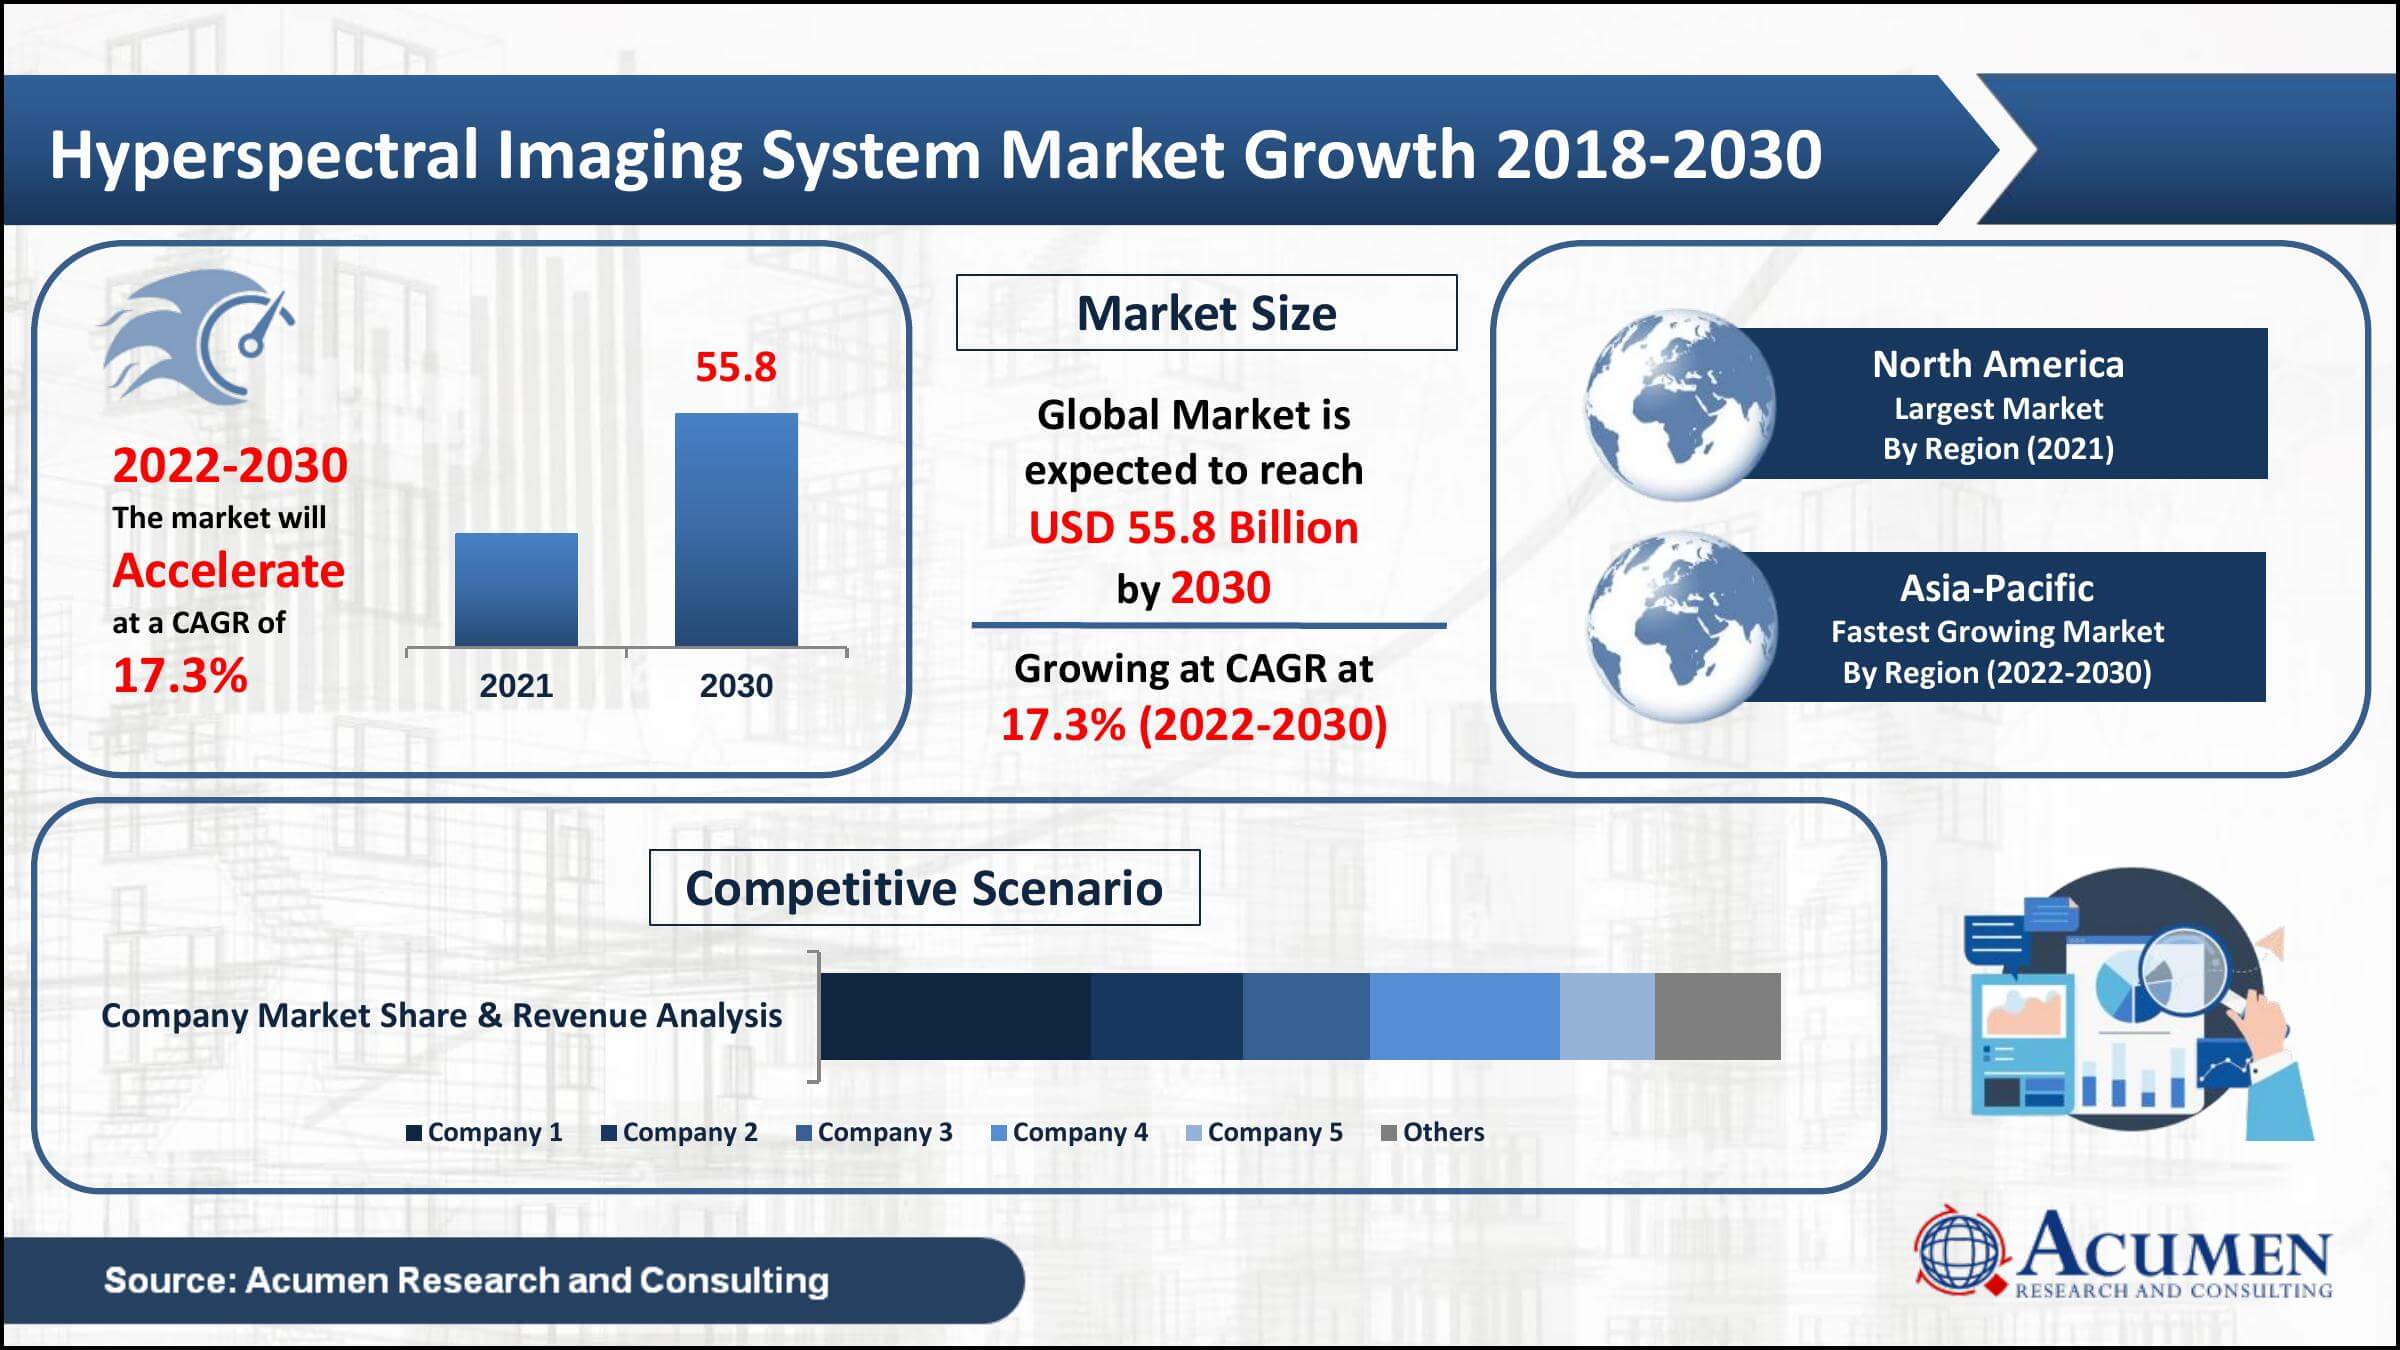 Global hyperspectral imaging system market revenue collected USD 13.4 Billion in 2021, with a 17.3% CAGR between 2022 and 2030